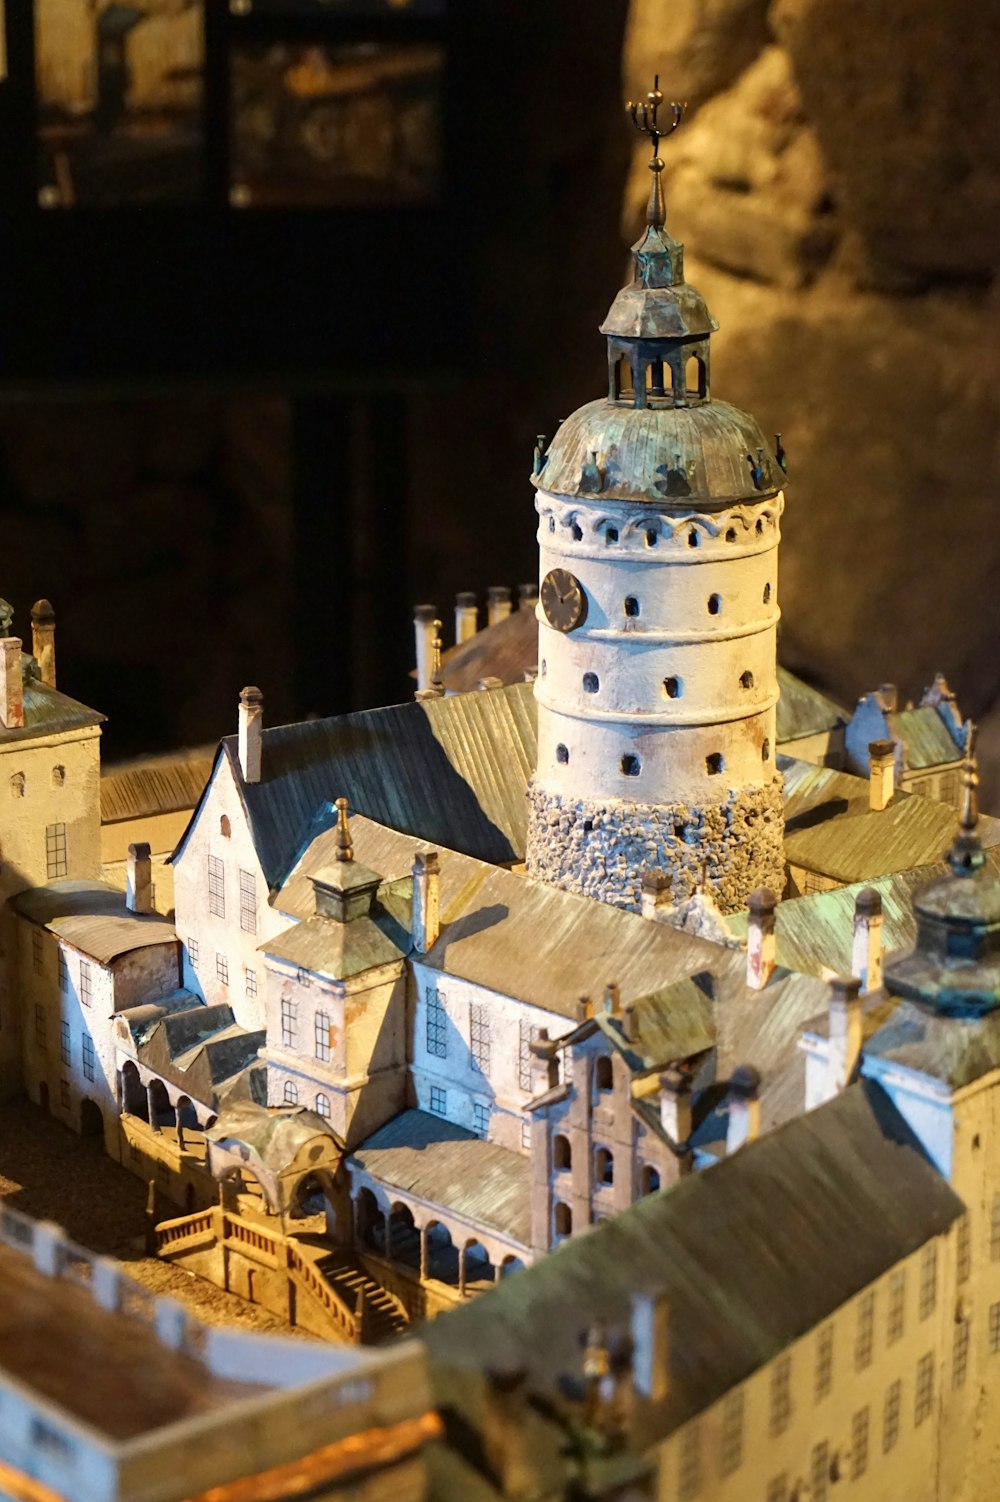 a model of a town with a clock tower